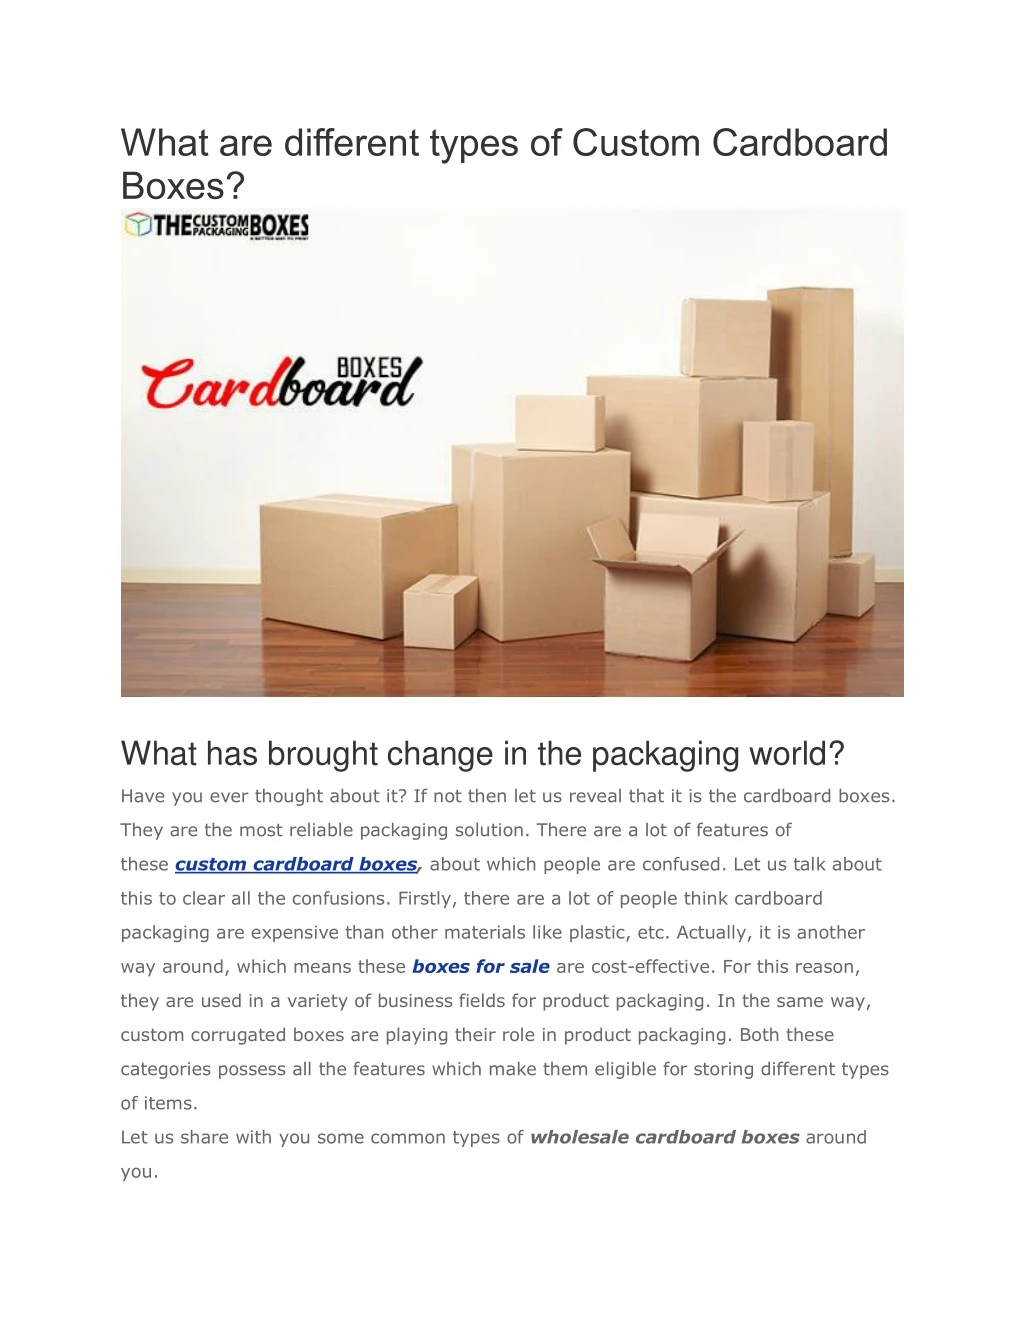 what are different types of custom cardboard boxes